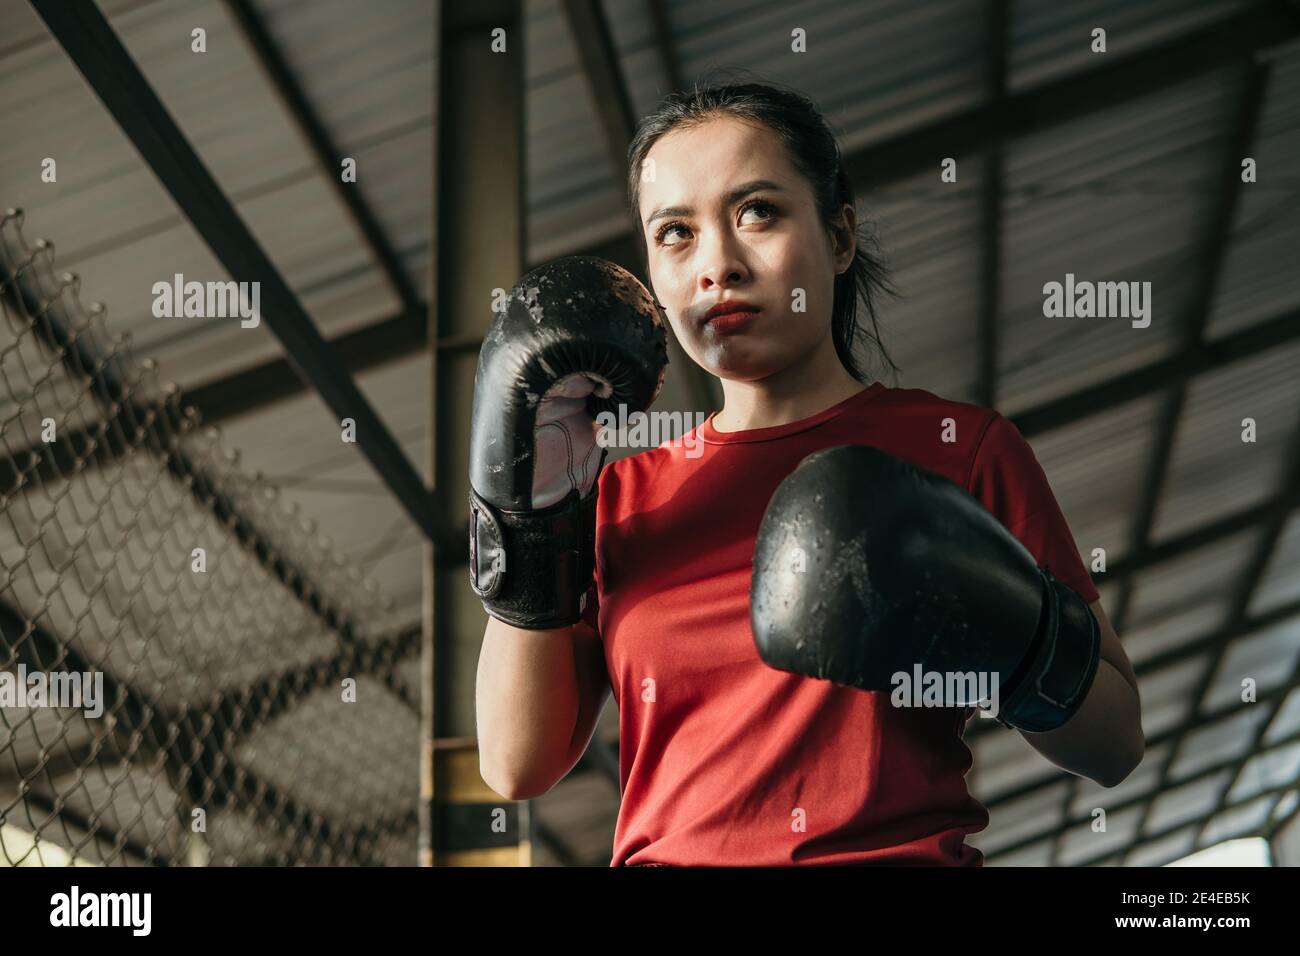 Mma Gloves High Resolution Stock Photography and Images - Alamy